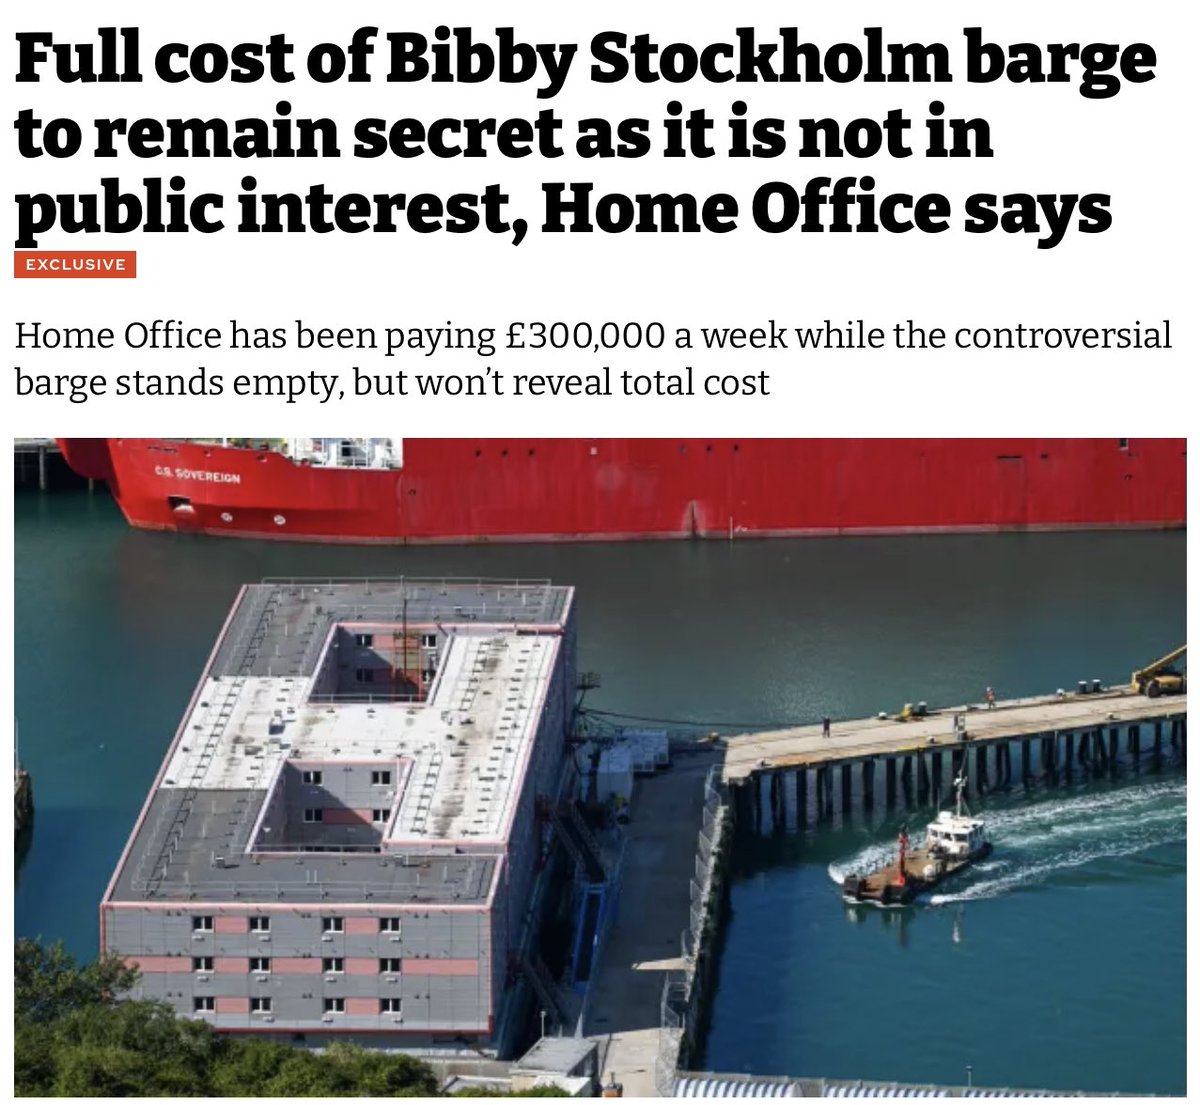 Not in the public interest to let the people who are paying for it - you and me - know the true cost of the Bibby Stockholm barge accommodation as a few asylum seekers are sent back there after Legionella scare bit.ly/3Q58tBe